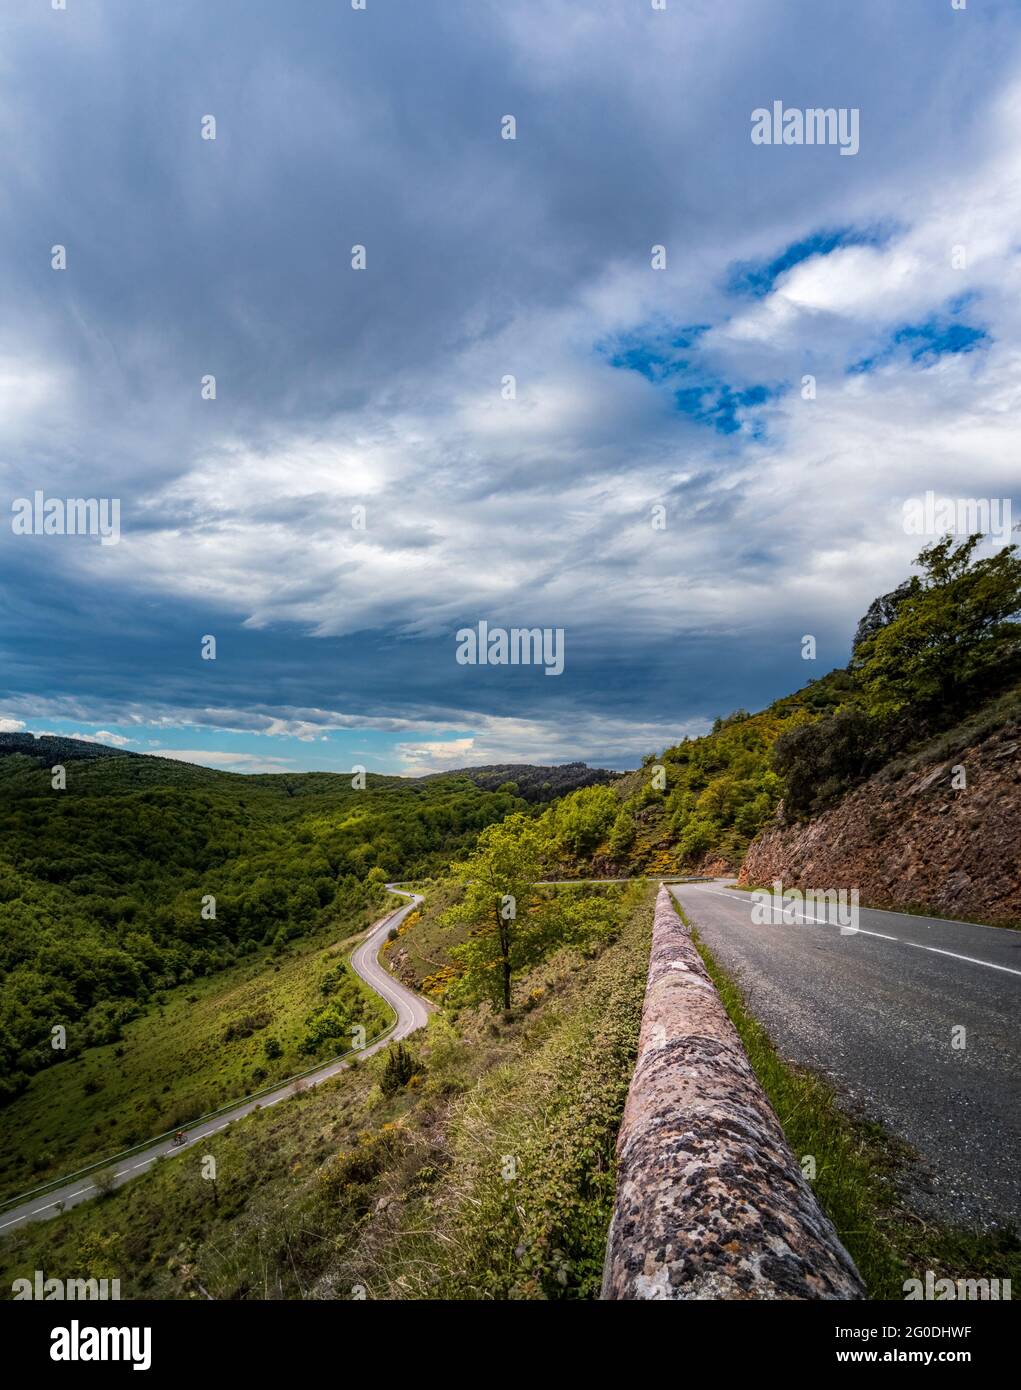 Spectacular mountain pass with curved road, top view Stock Photo